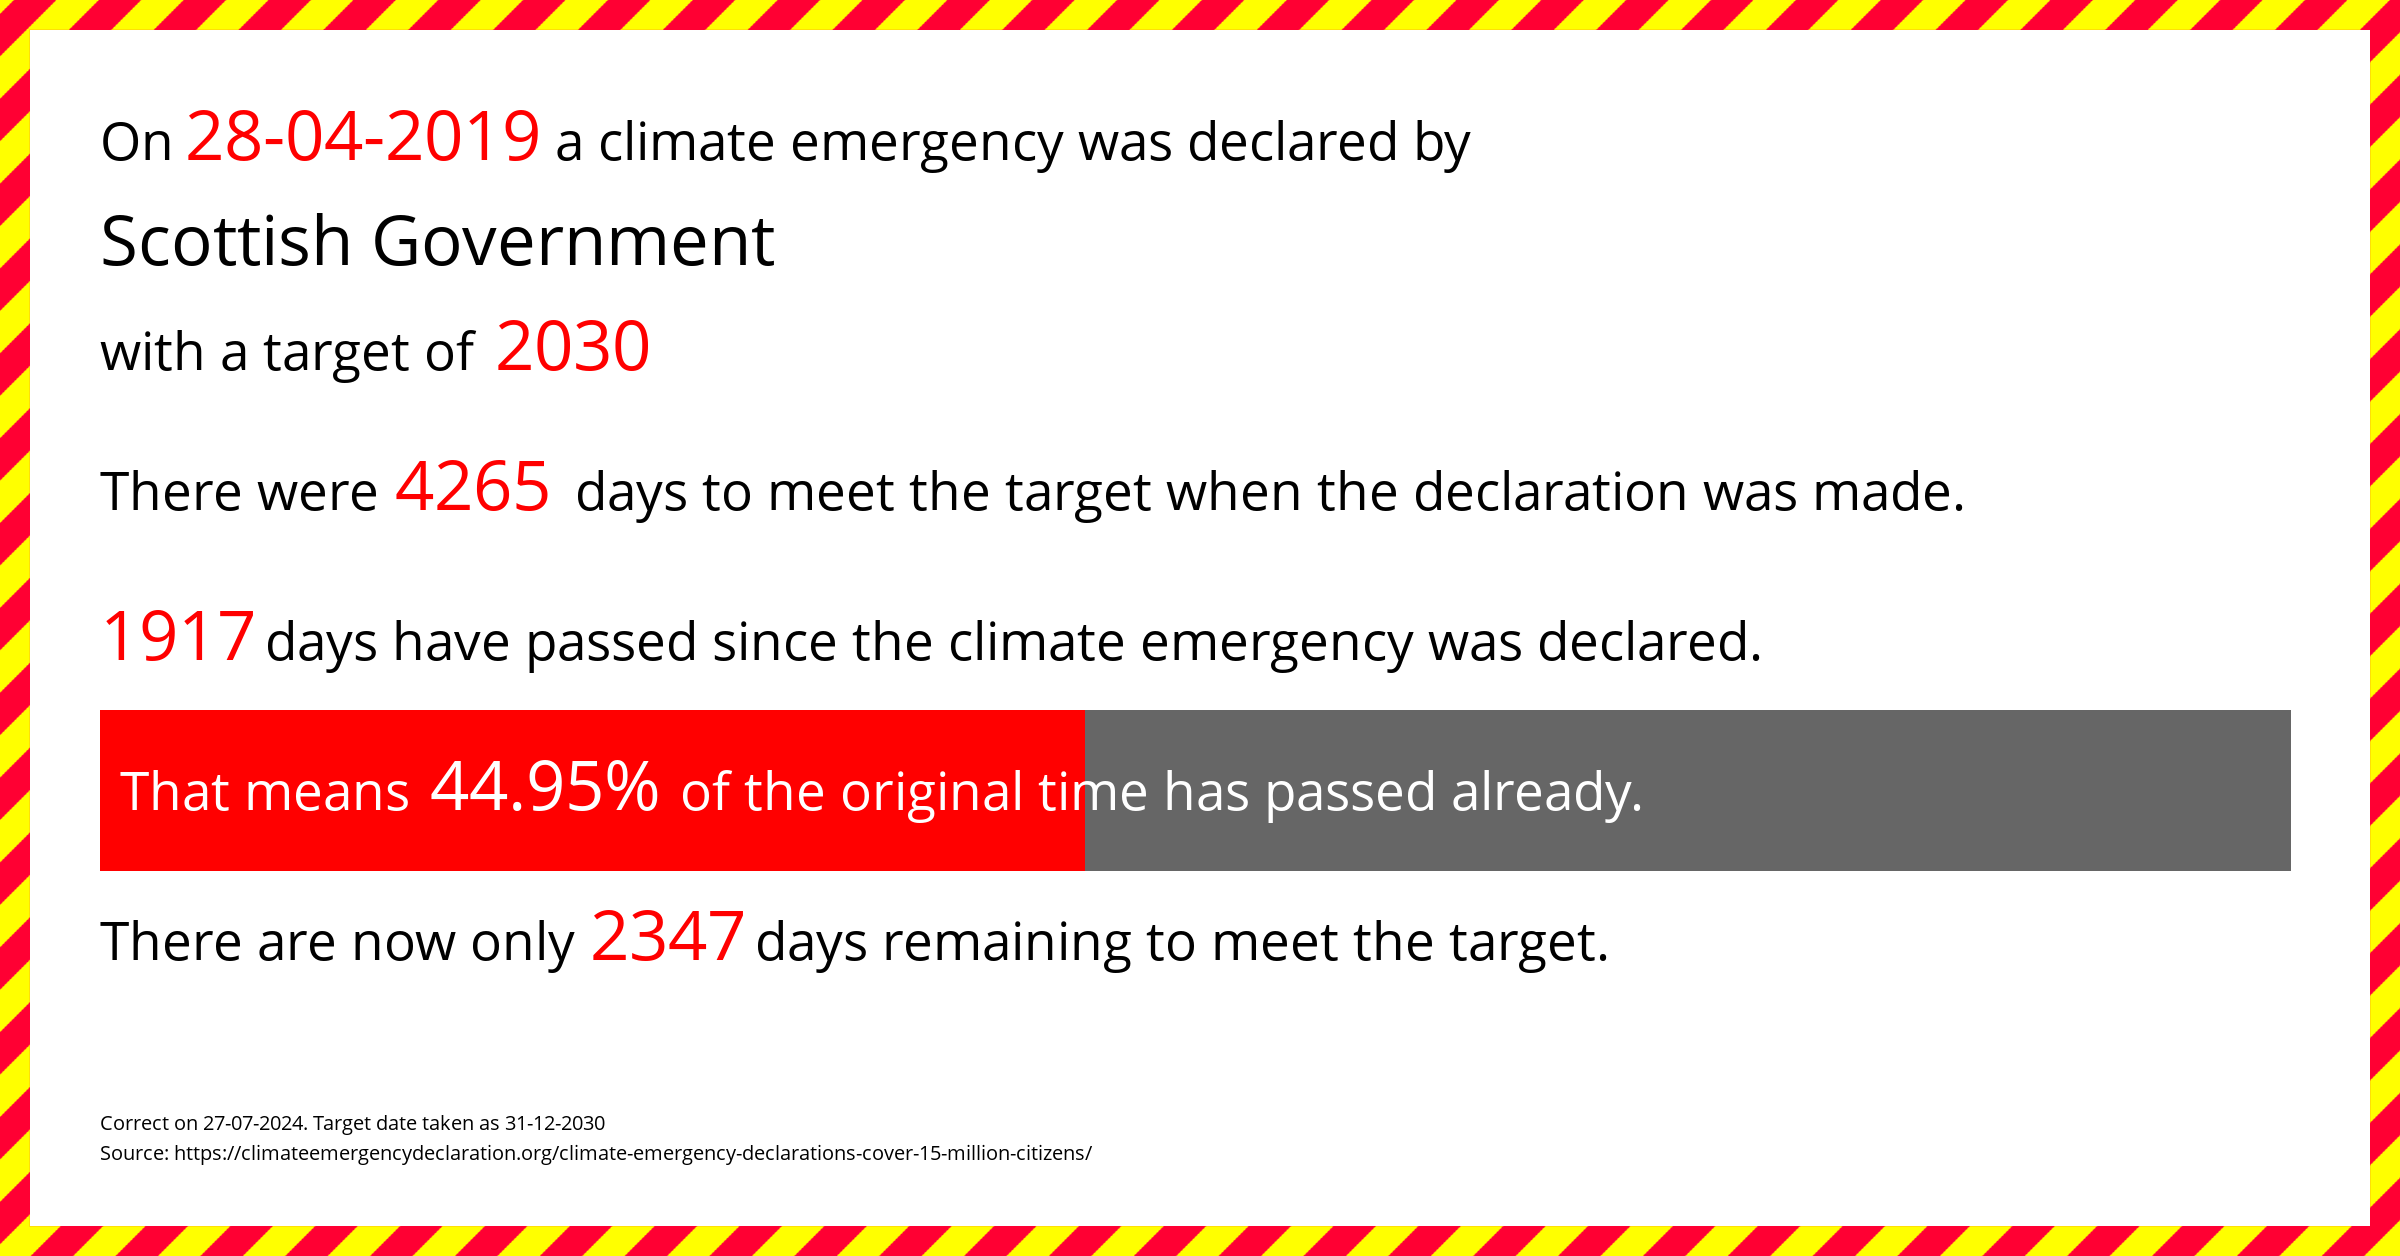 Scottish Government declared a Climate emergency on Sunday 28th April 2019, with a target of 2030.